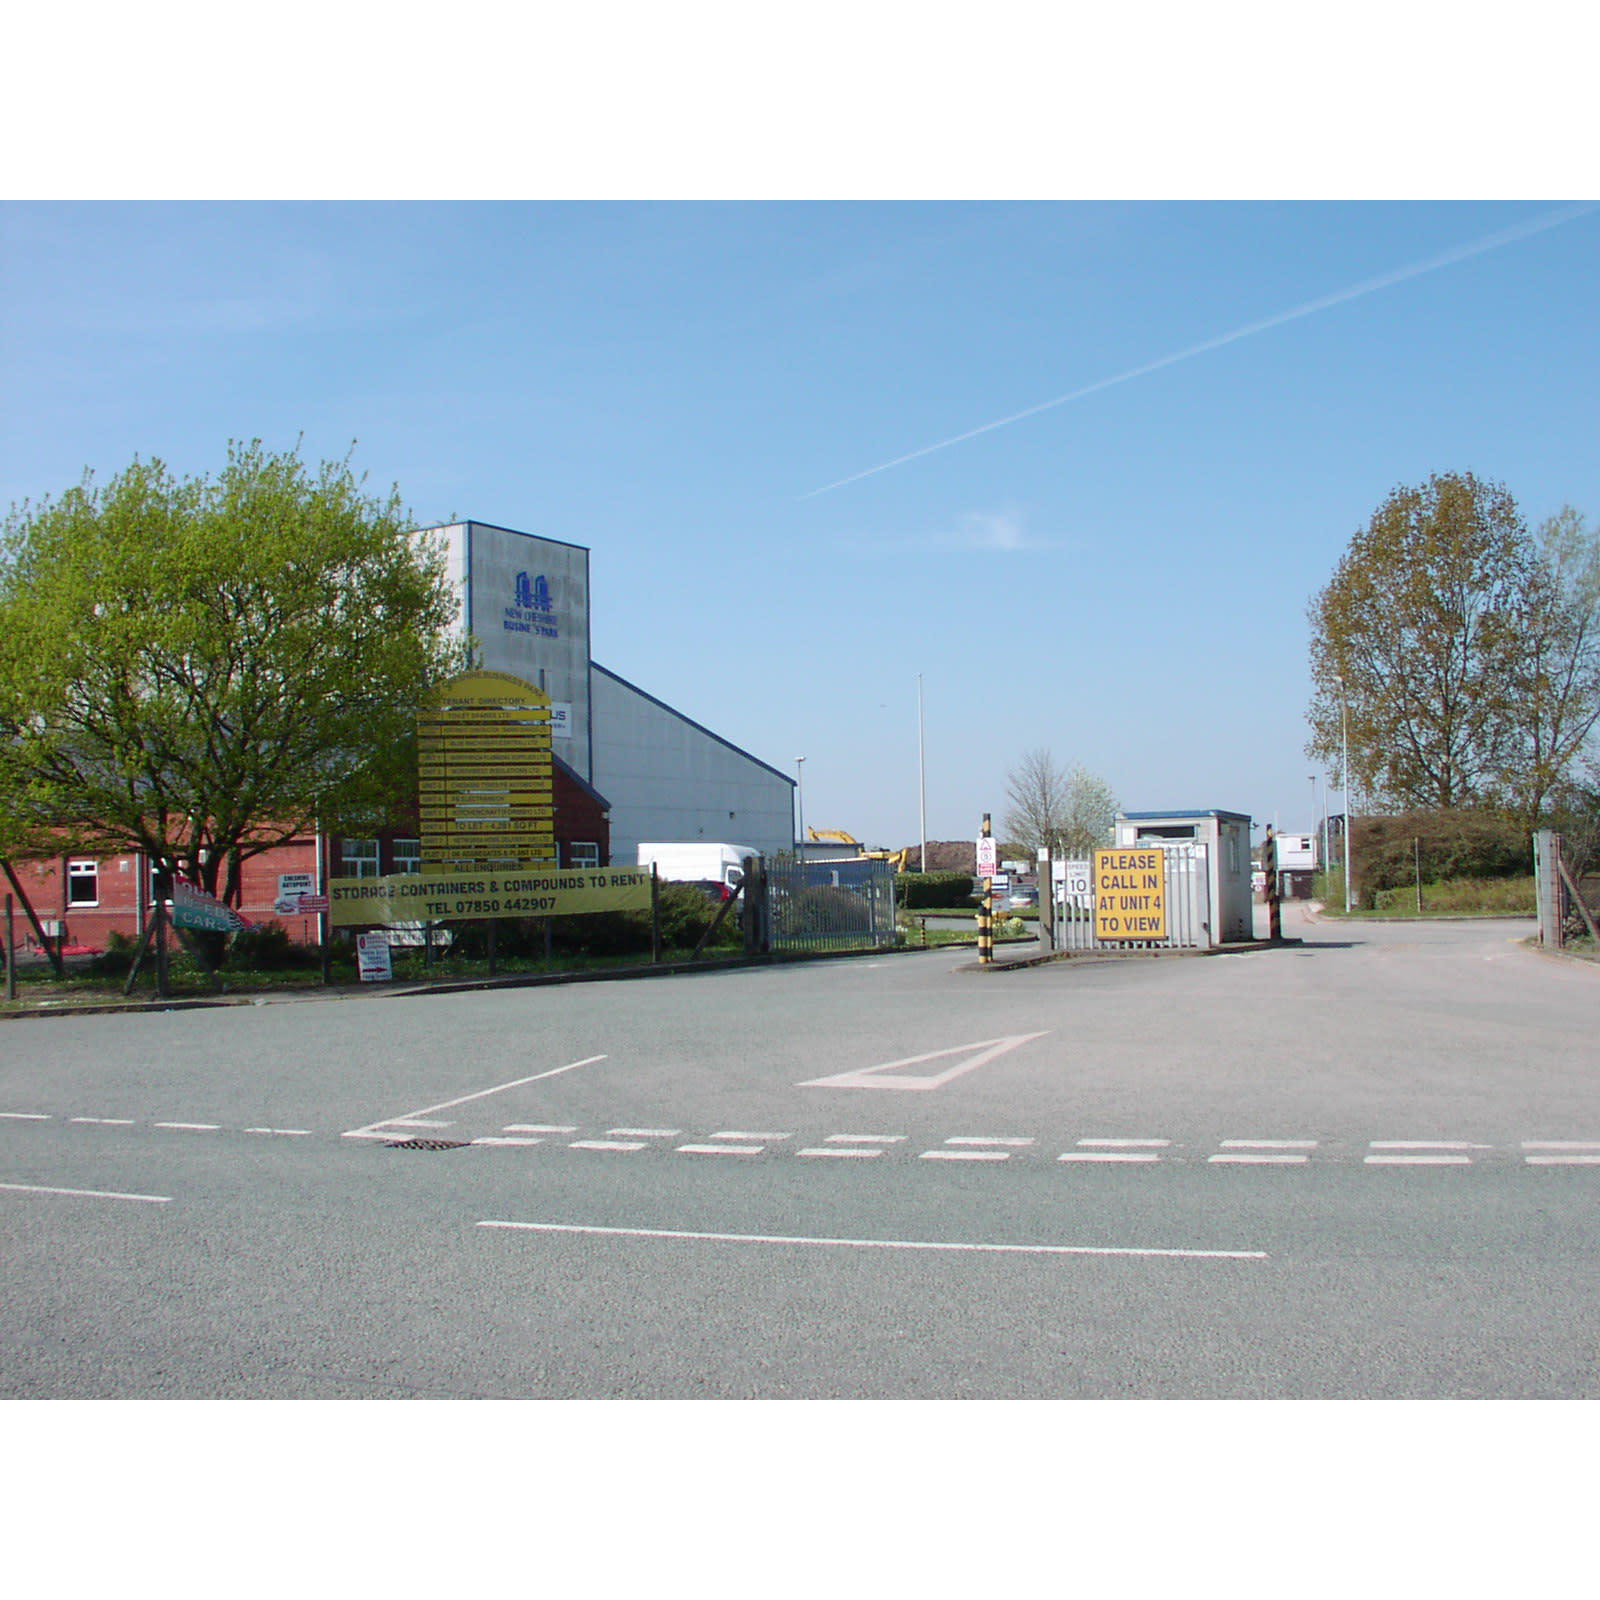 New Cheshire Business Park Ltd - Northwich, Cheshire CW9 6GG - 07850 442907 | ShowMeLocal.com